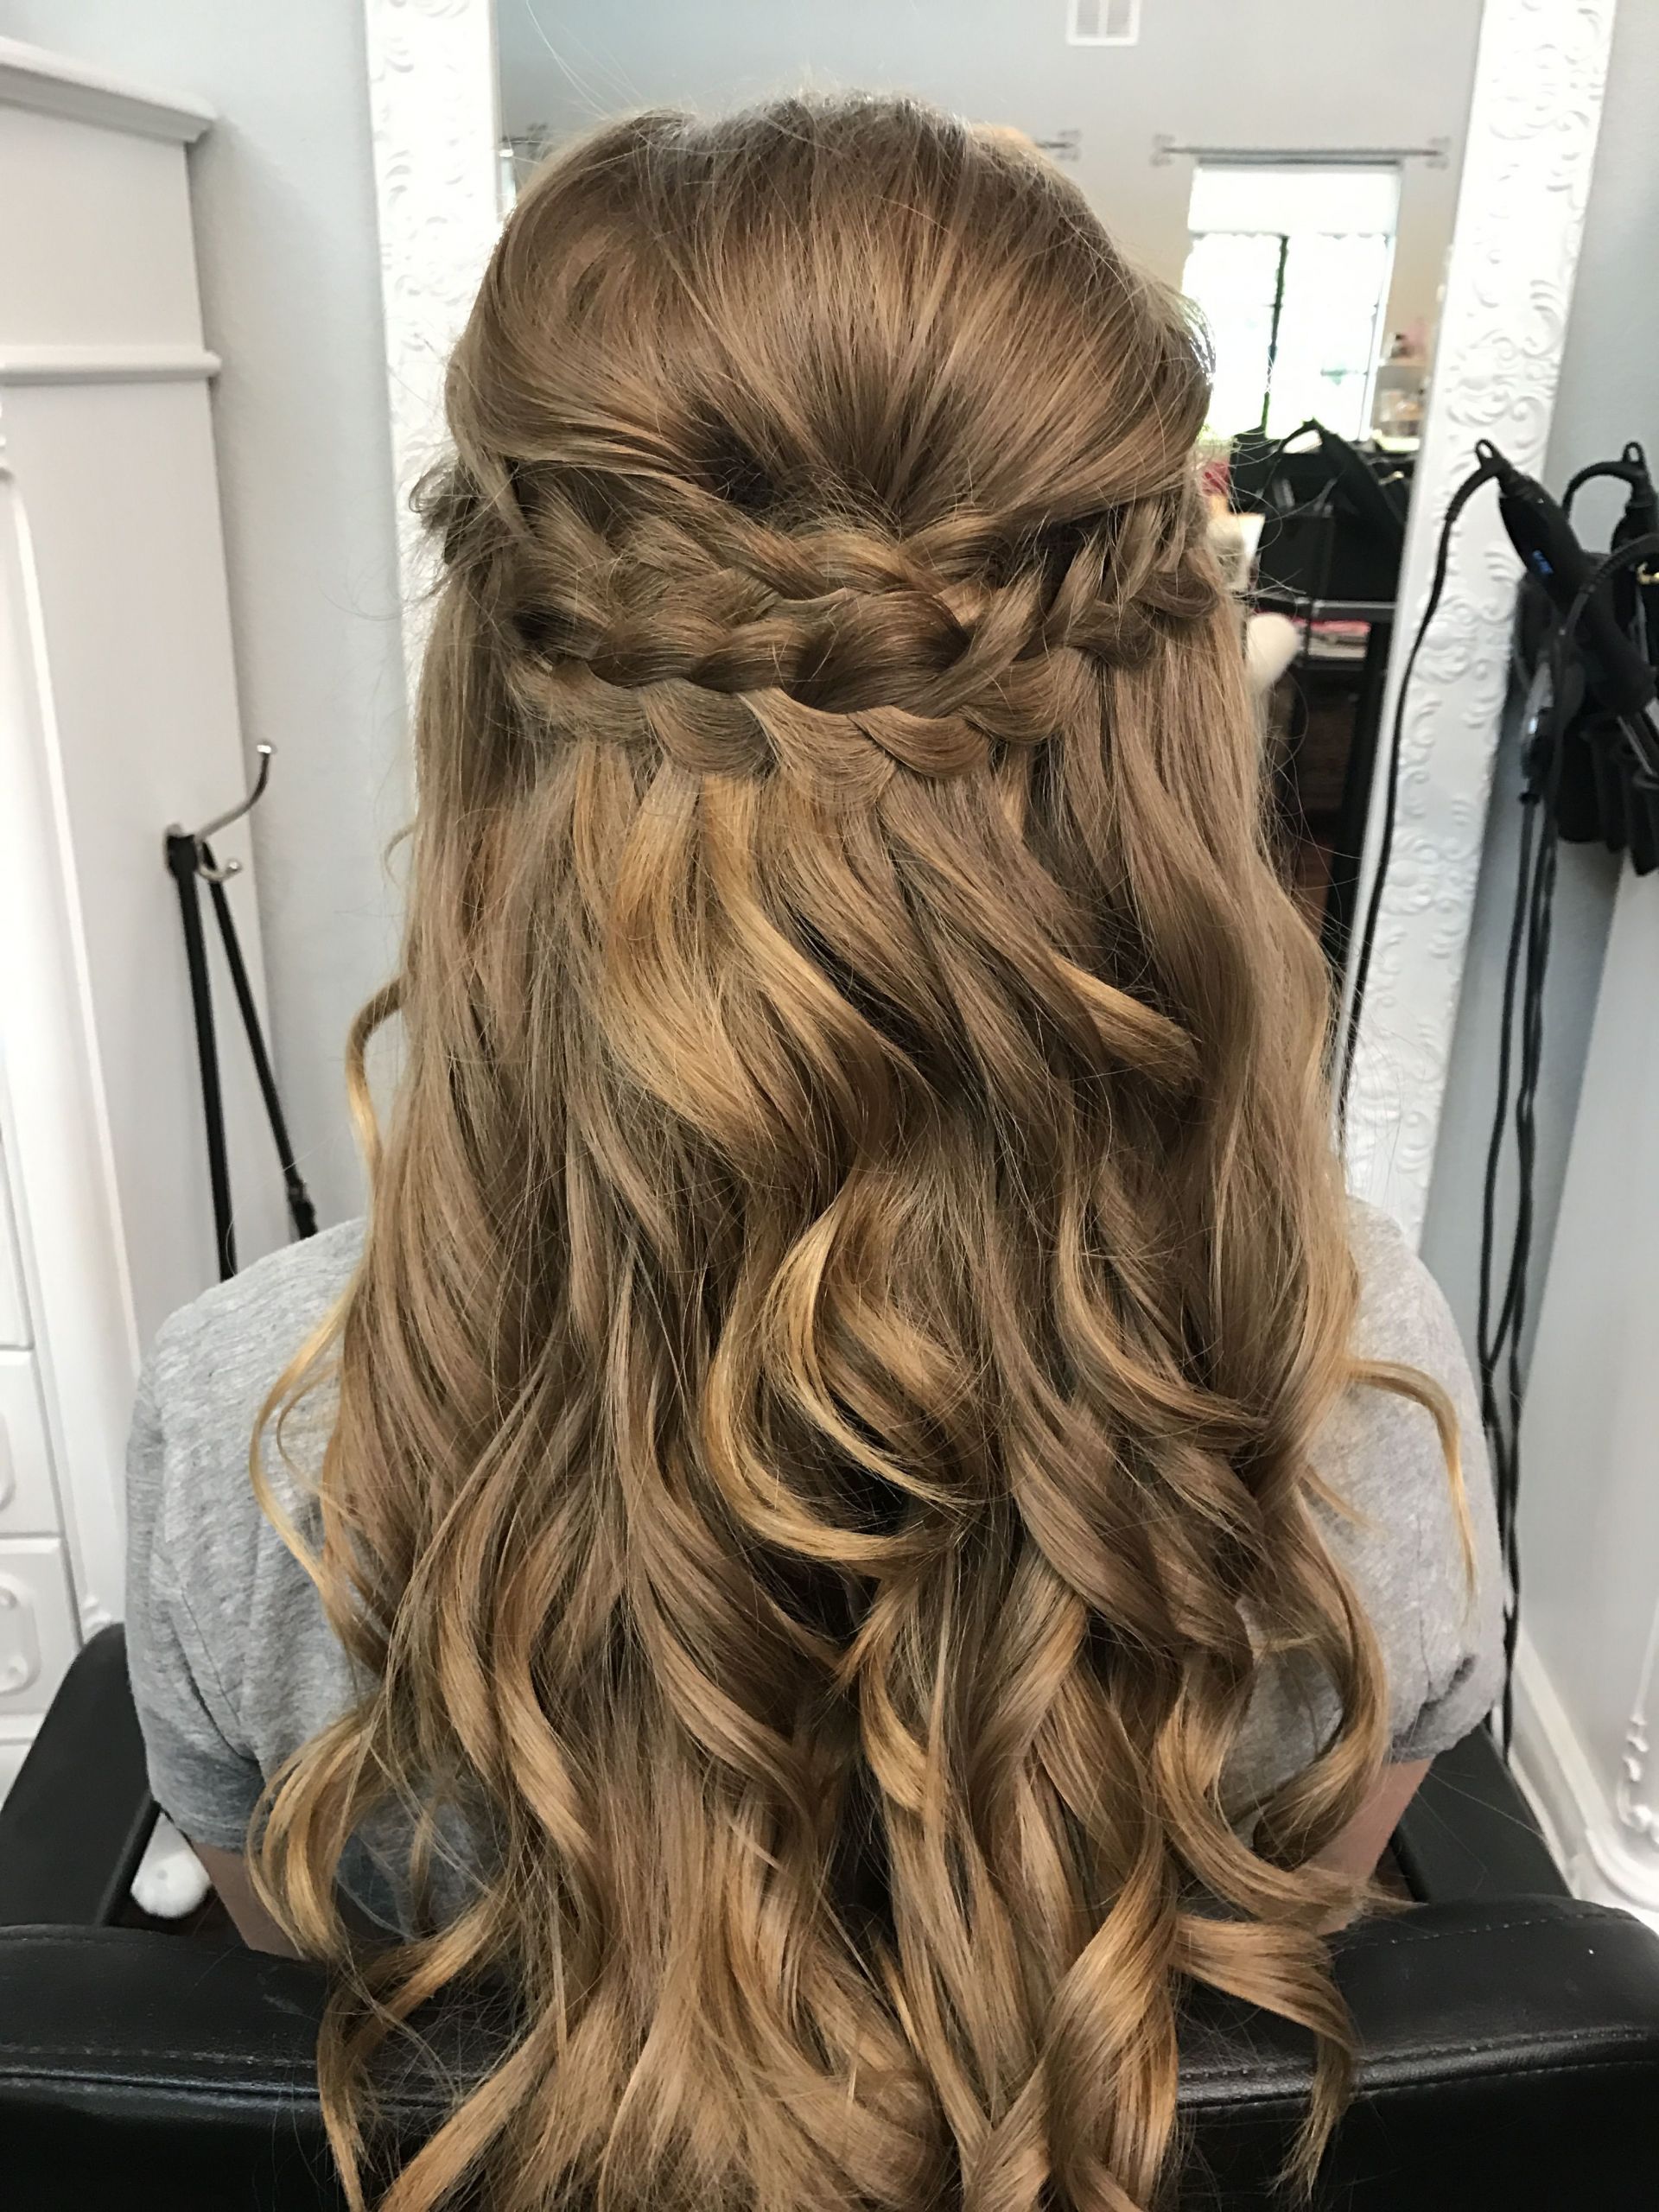 Hairstyles For Prom Up
 Braided half up half down prom hair